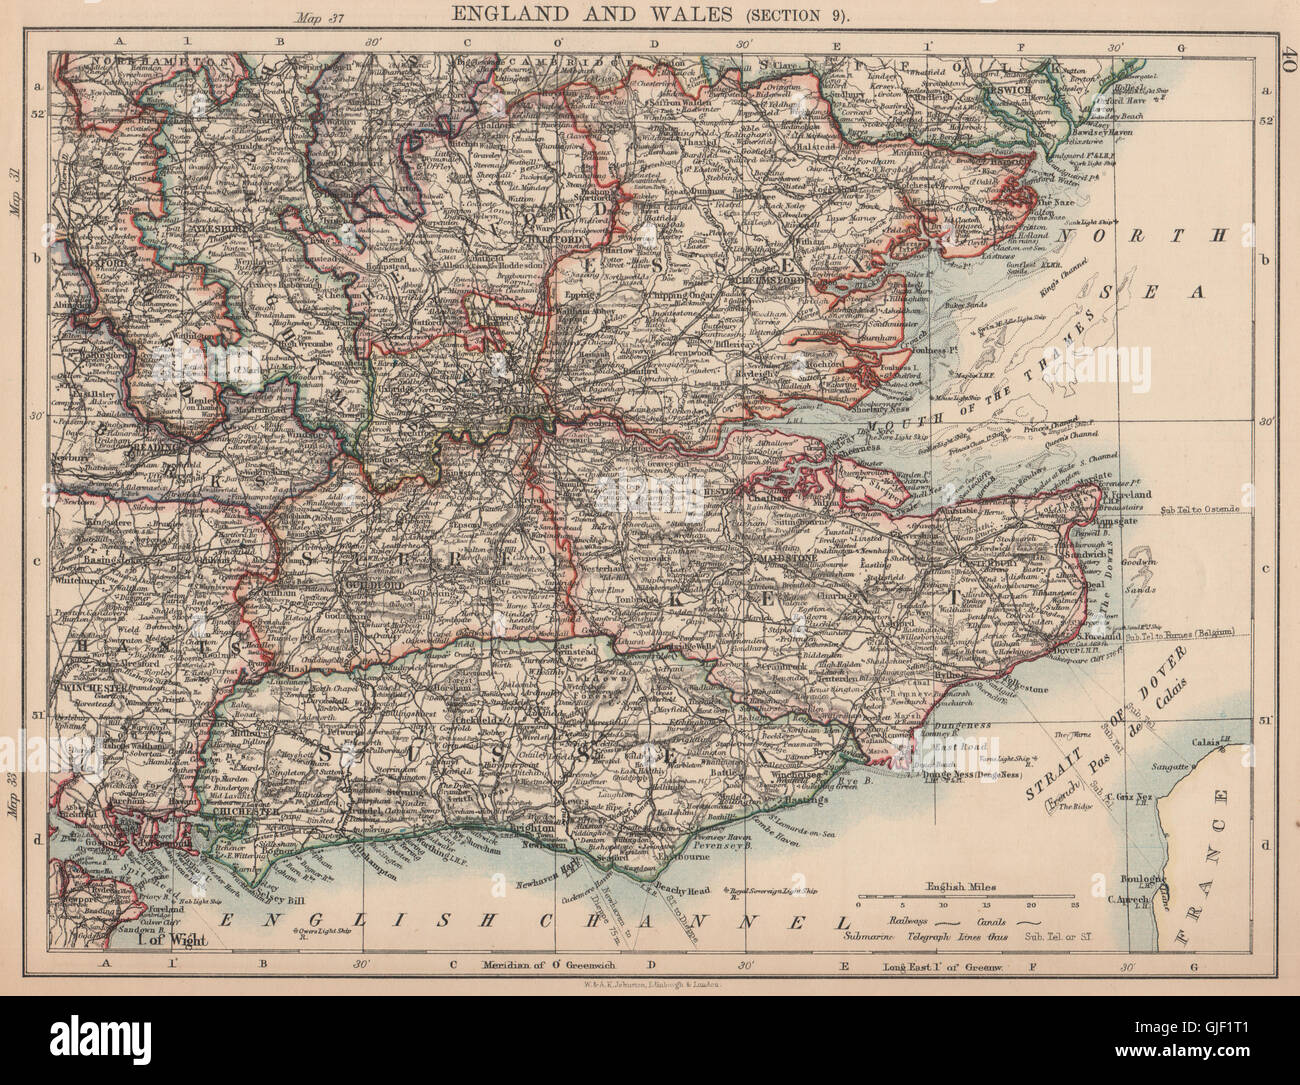 A sud-est dell' Inghilterra. Home Counties London Kent Essex Sussex Surrey, 1906 Mappa Foto Stock